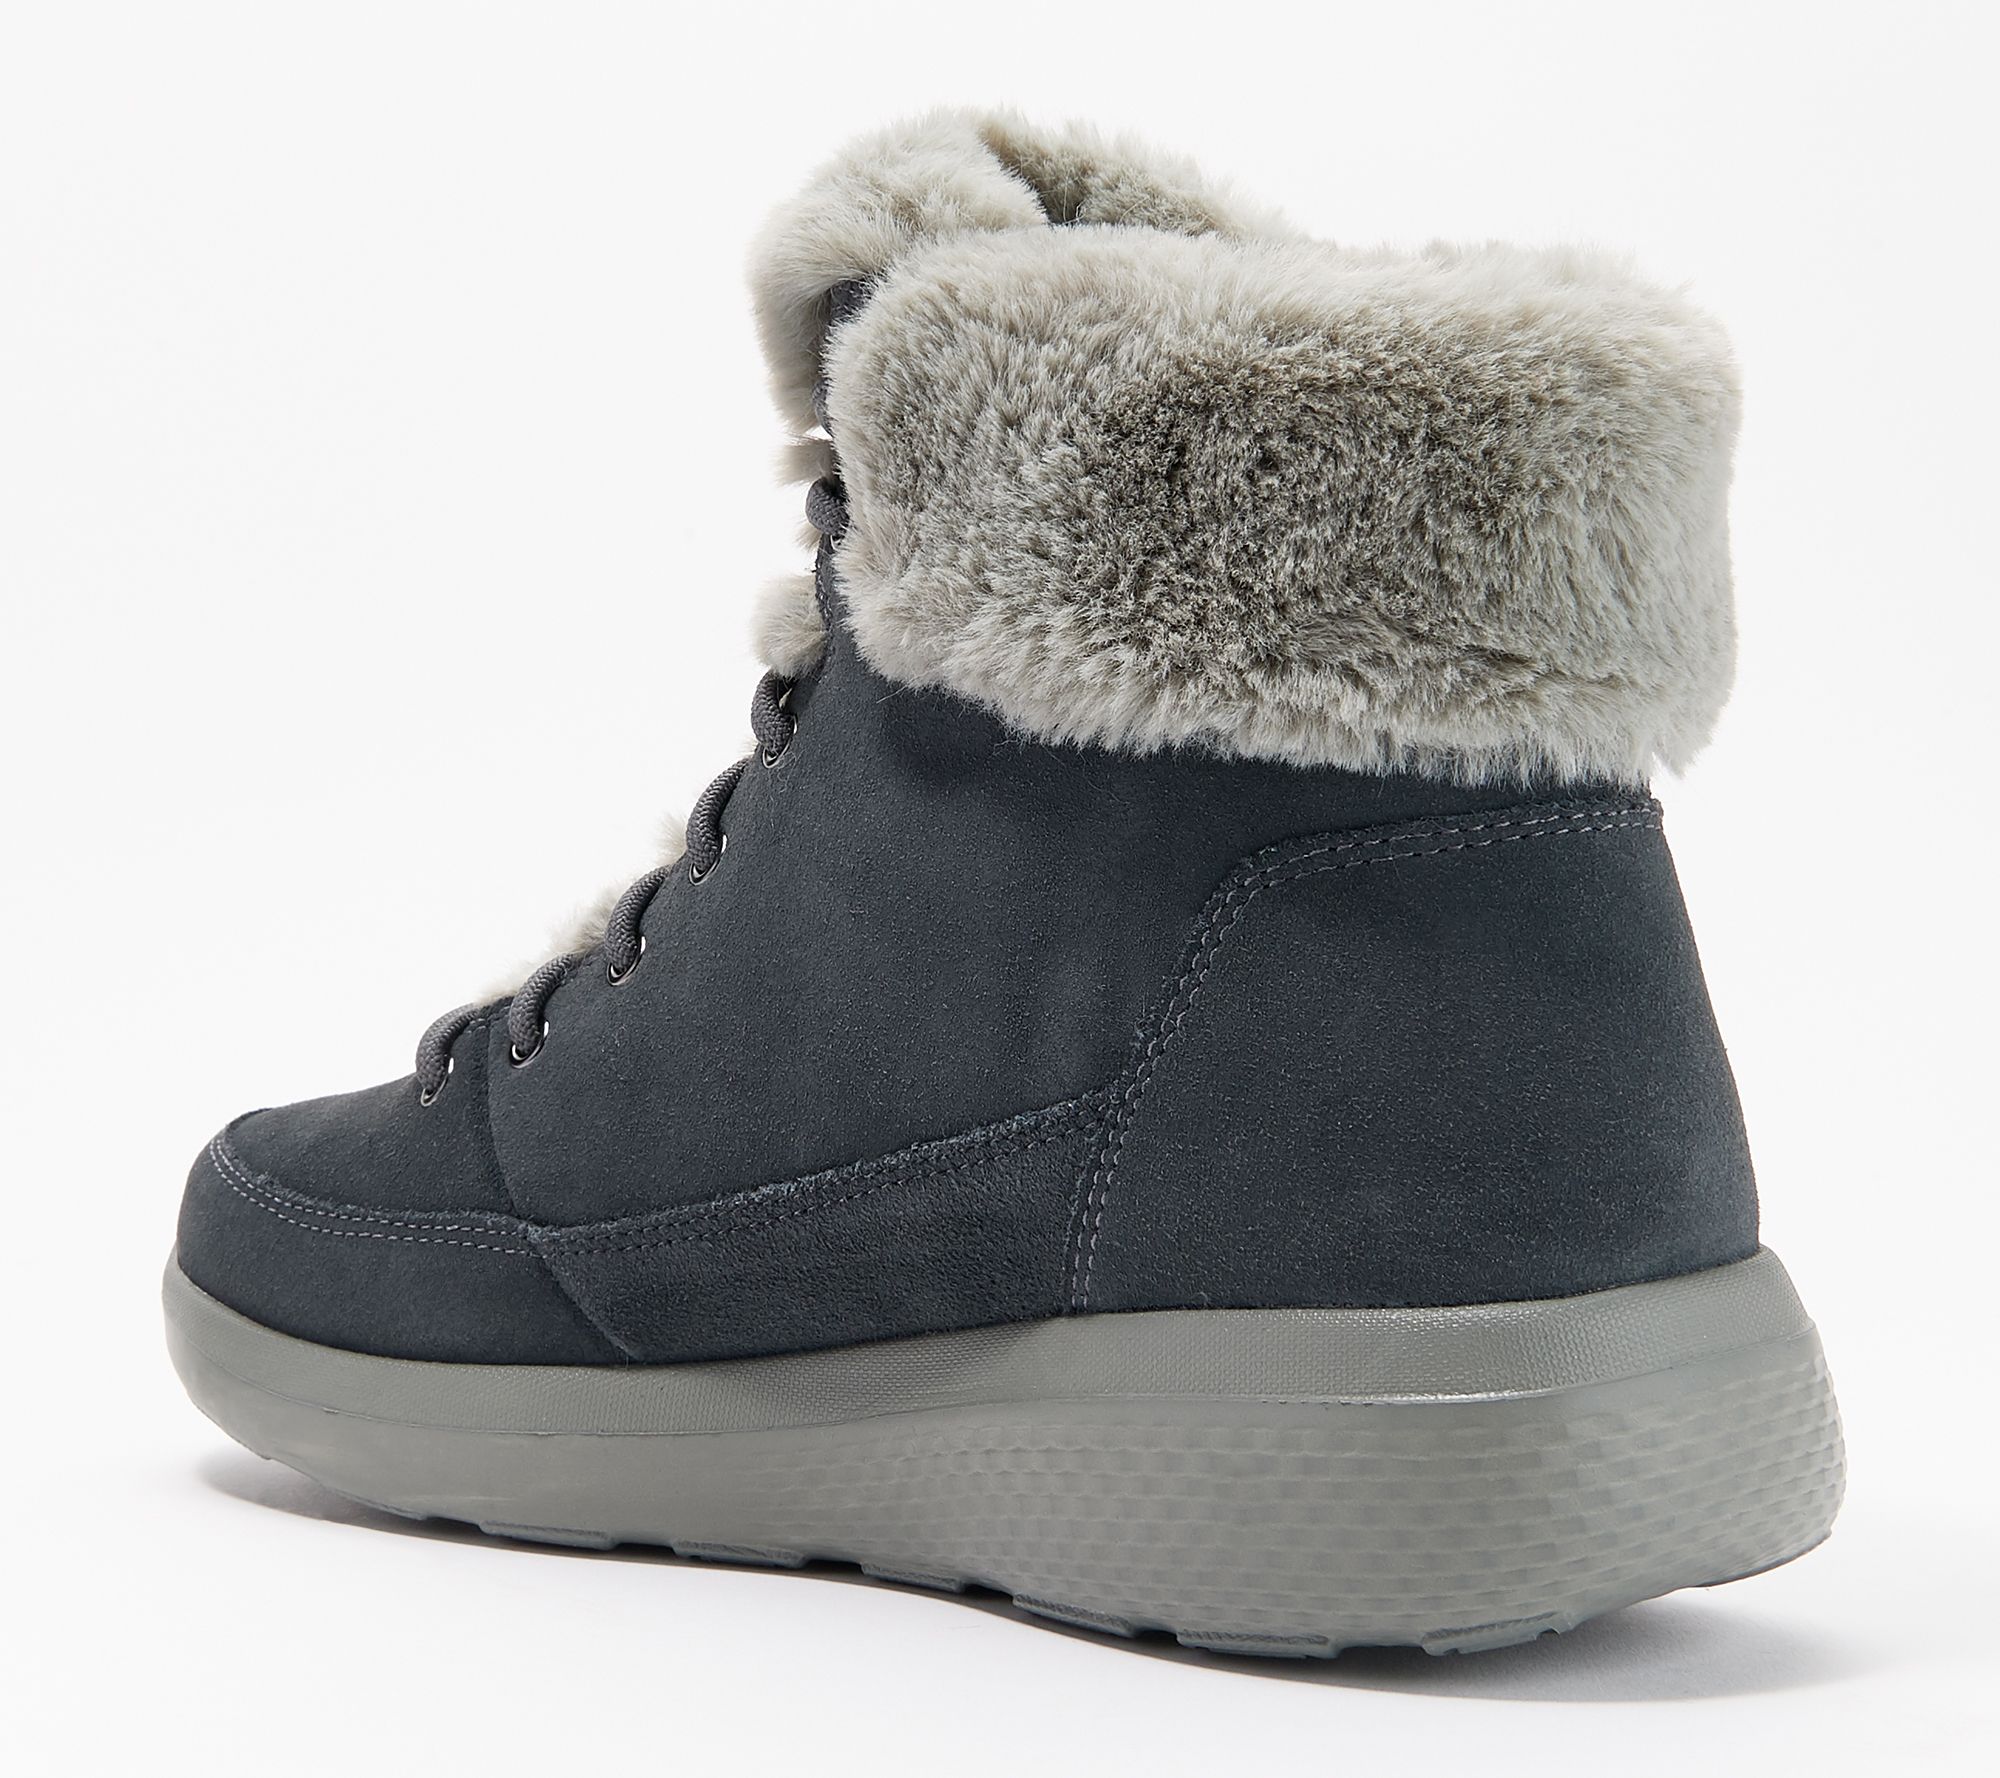 positie Nationaal Reis Skechers On-the-Go Water Repellent Suede Boots - Winter Chill - QVC.com